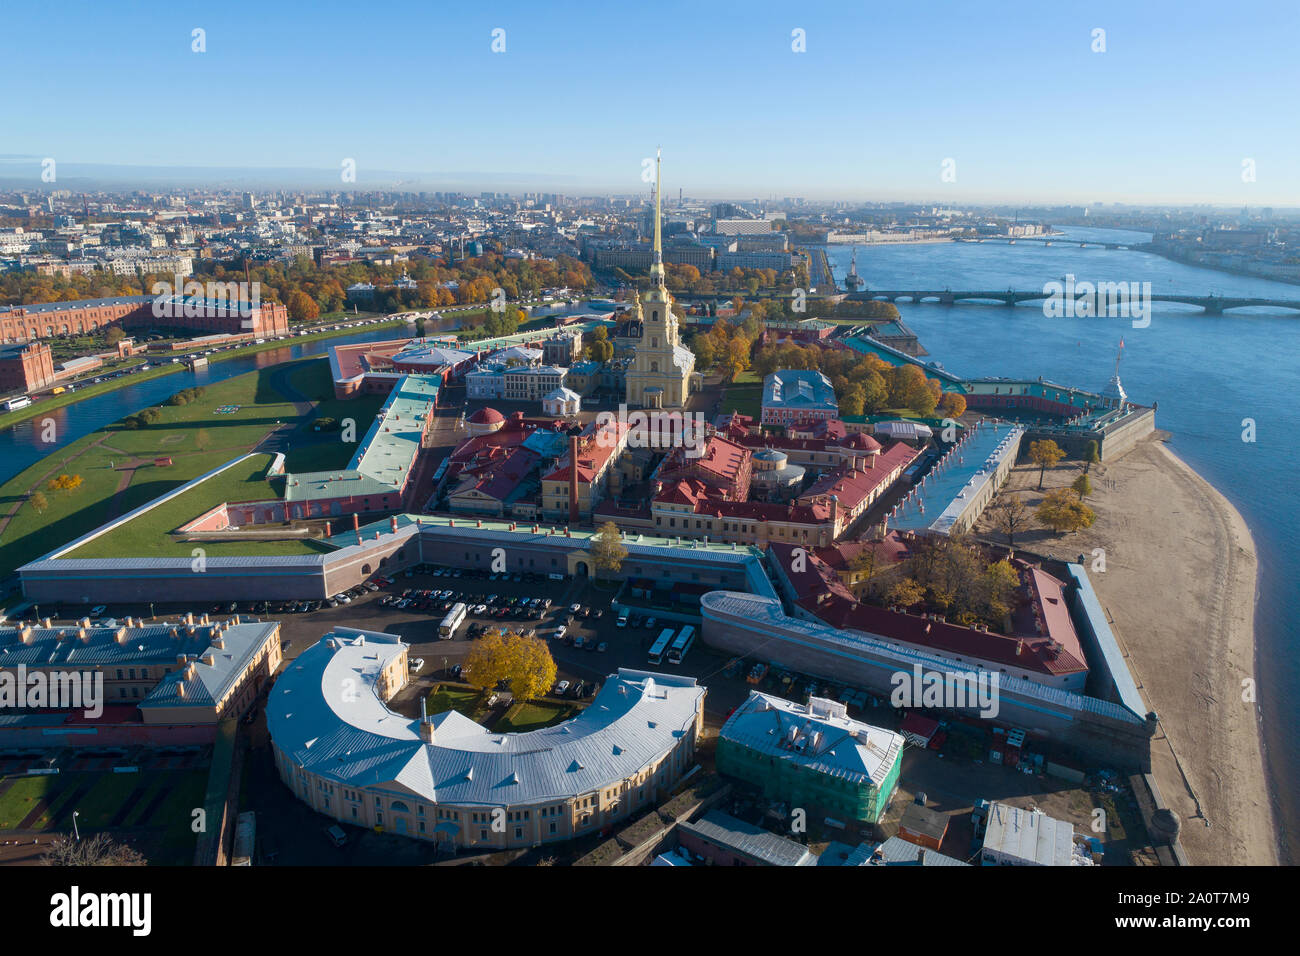 A view from the height of the Peter and Paul Fortress on a sunny October day. Saint-Petersburg, Russia Stock Photo